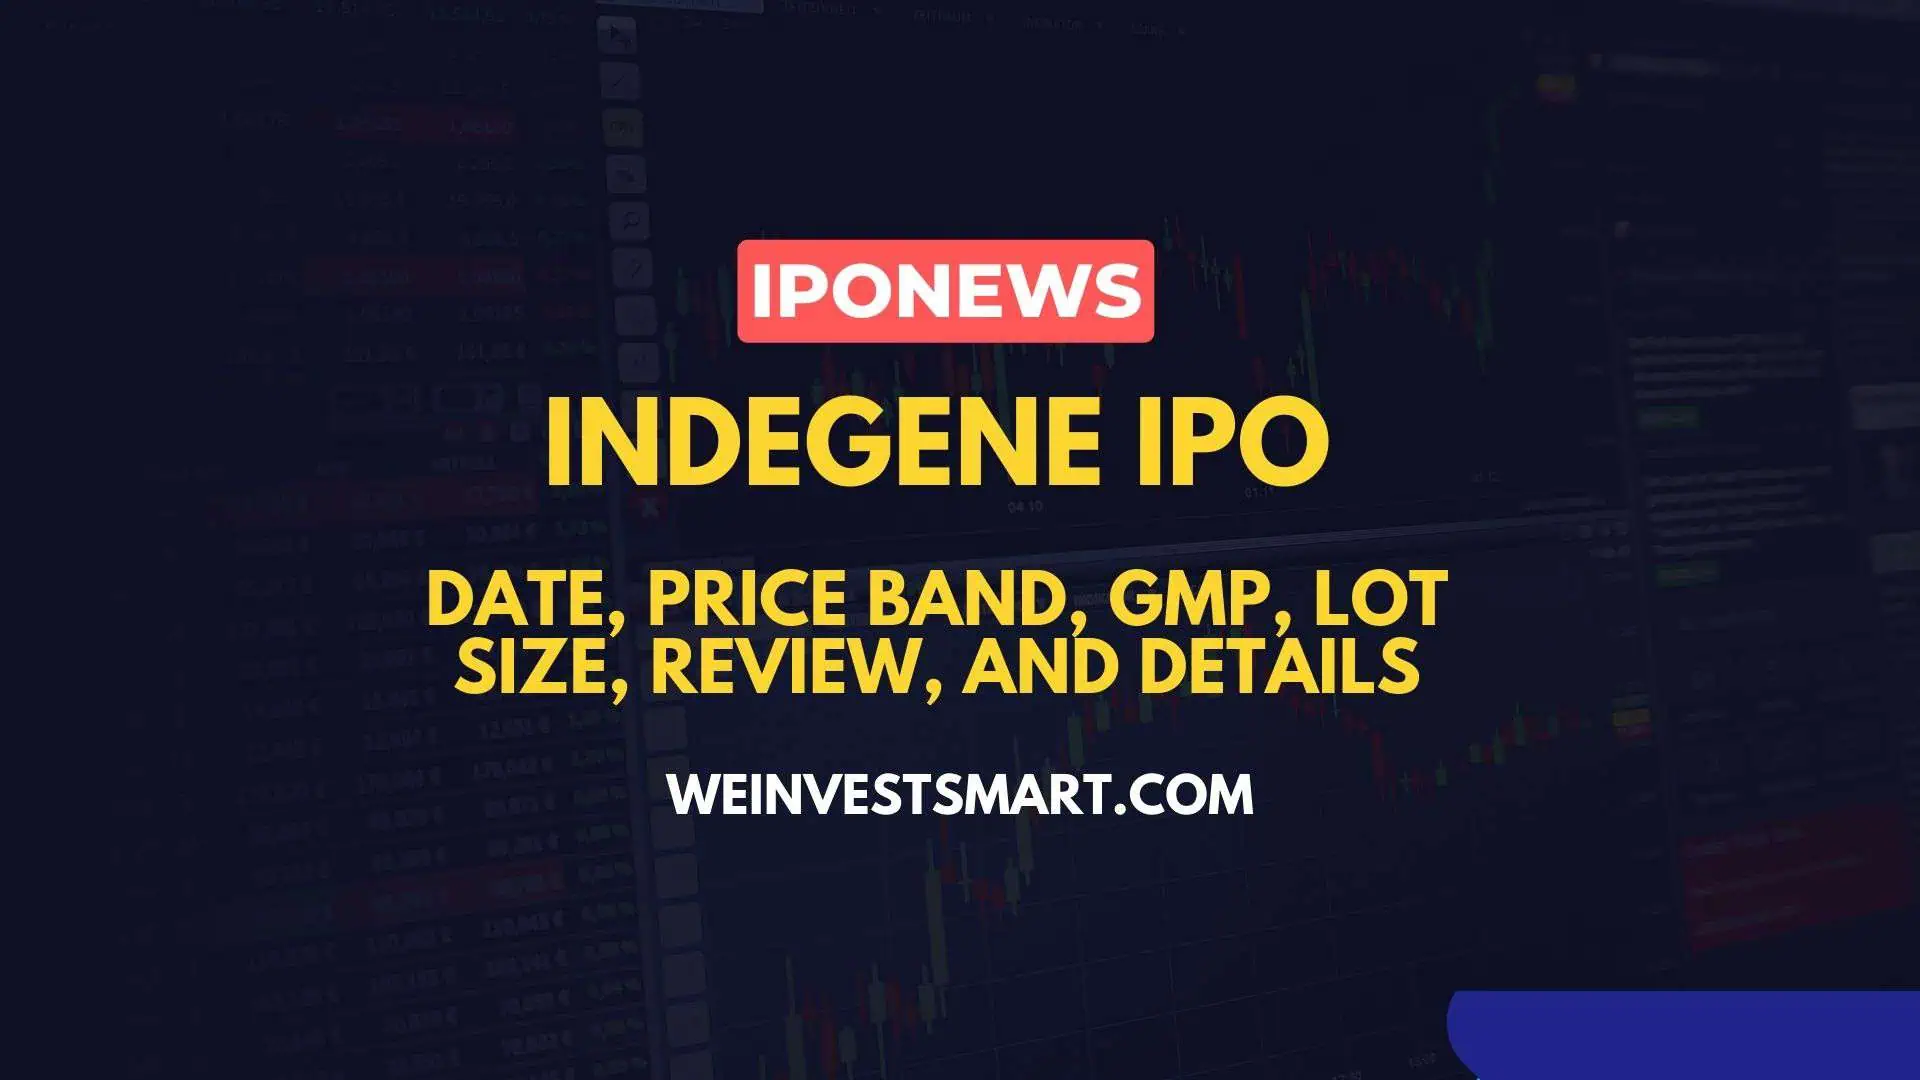 Indegene IPO Date, Price Band, GMP, Lot Size, Review, And Details